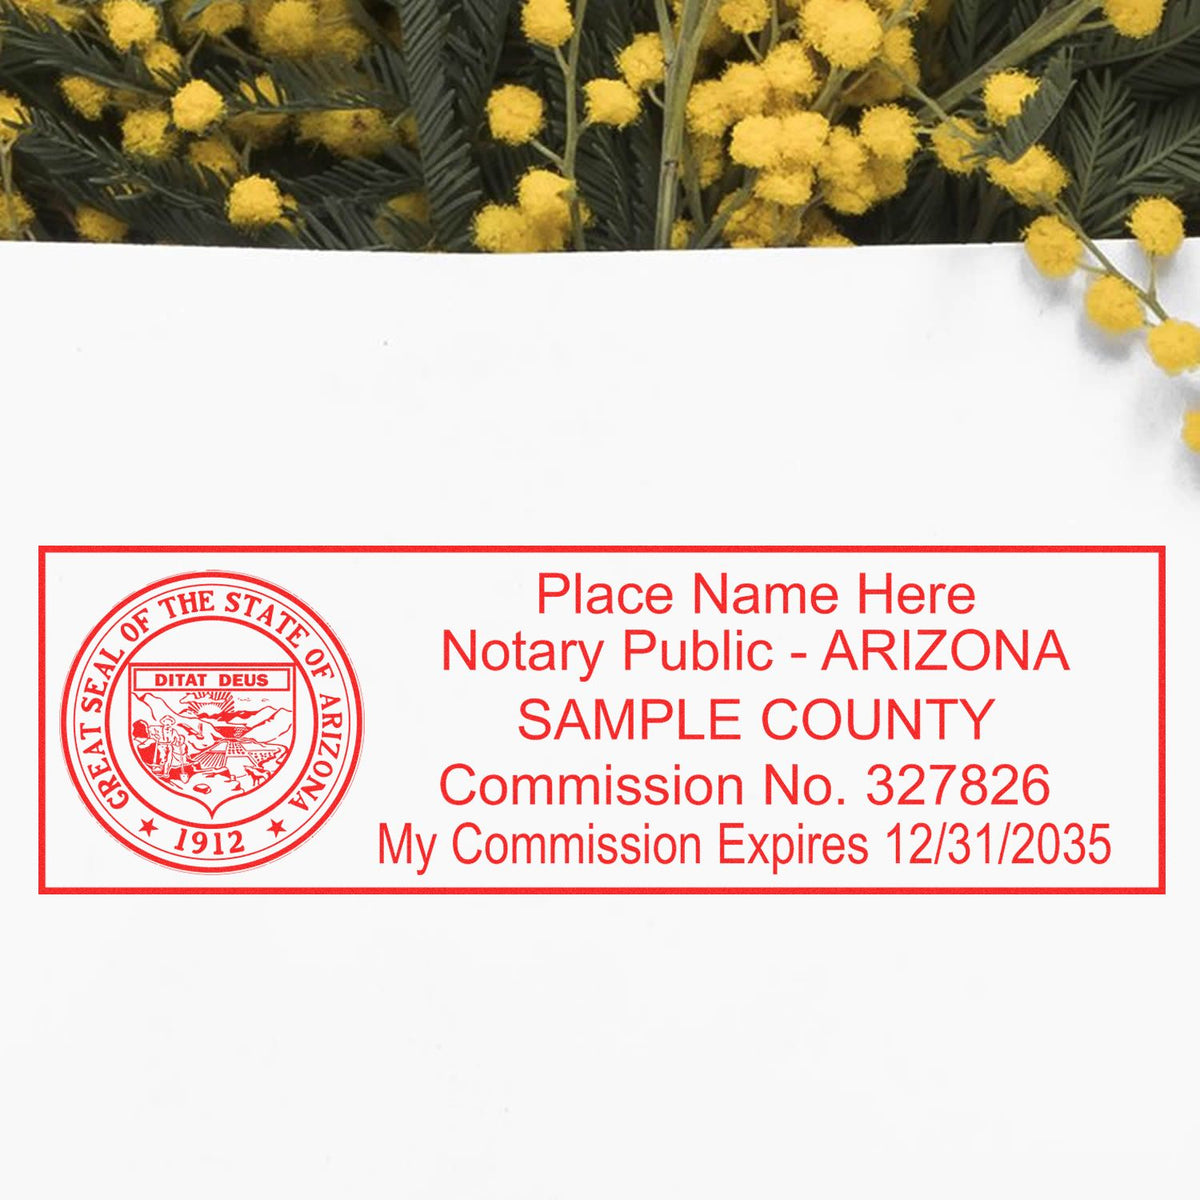 An alternative view of the MaxLight Premium Pre-Inked Arizona State Seal Notarial Stamp stamped on a sheet of paper showing the image in use